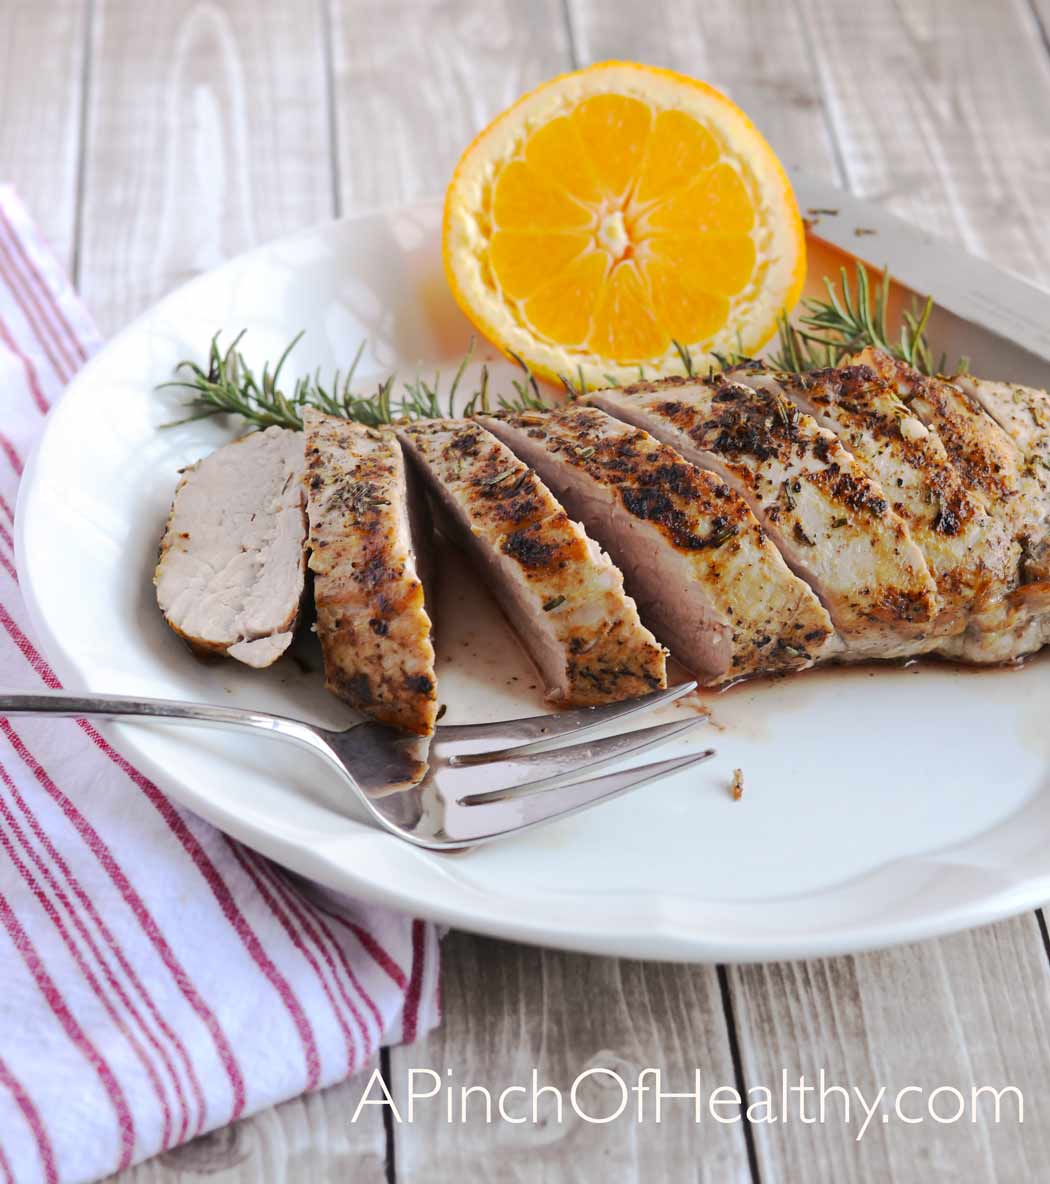 Grilled Pork Tenderloin on the Stovetop from https://www.apinchofhealthy.com/